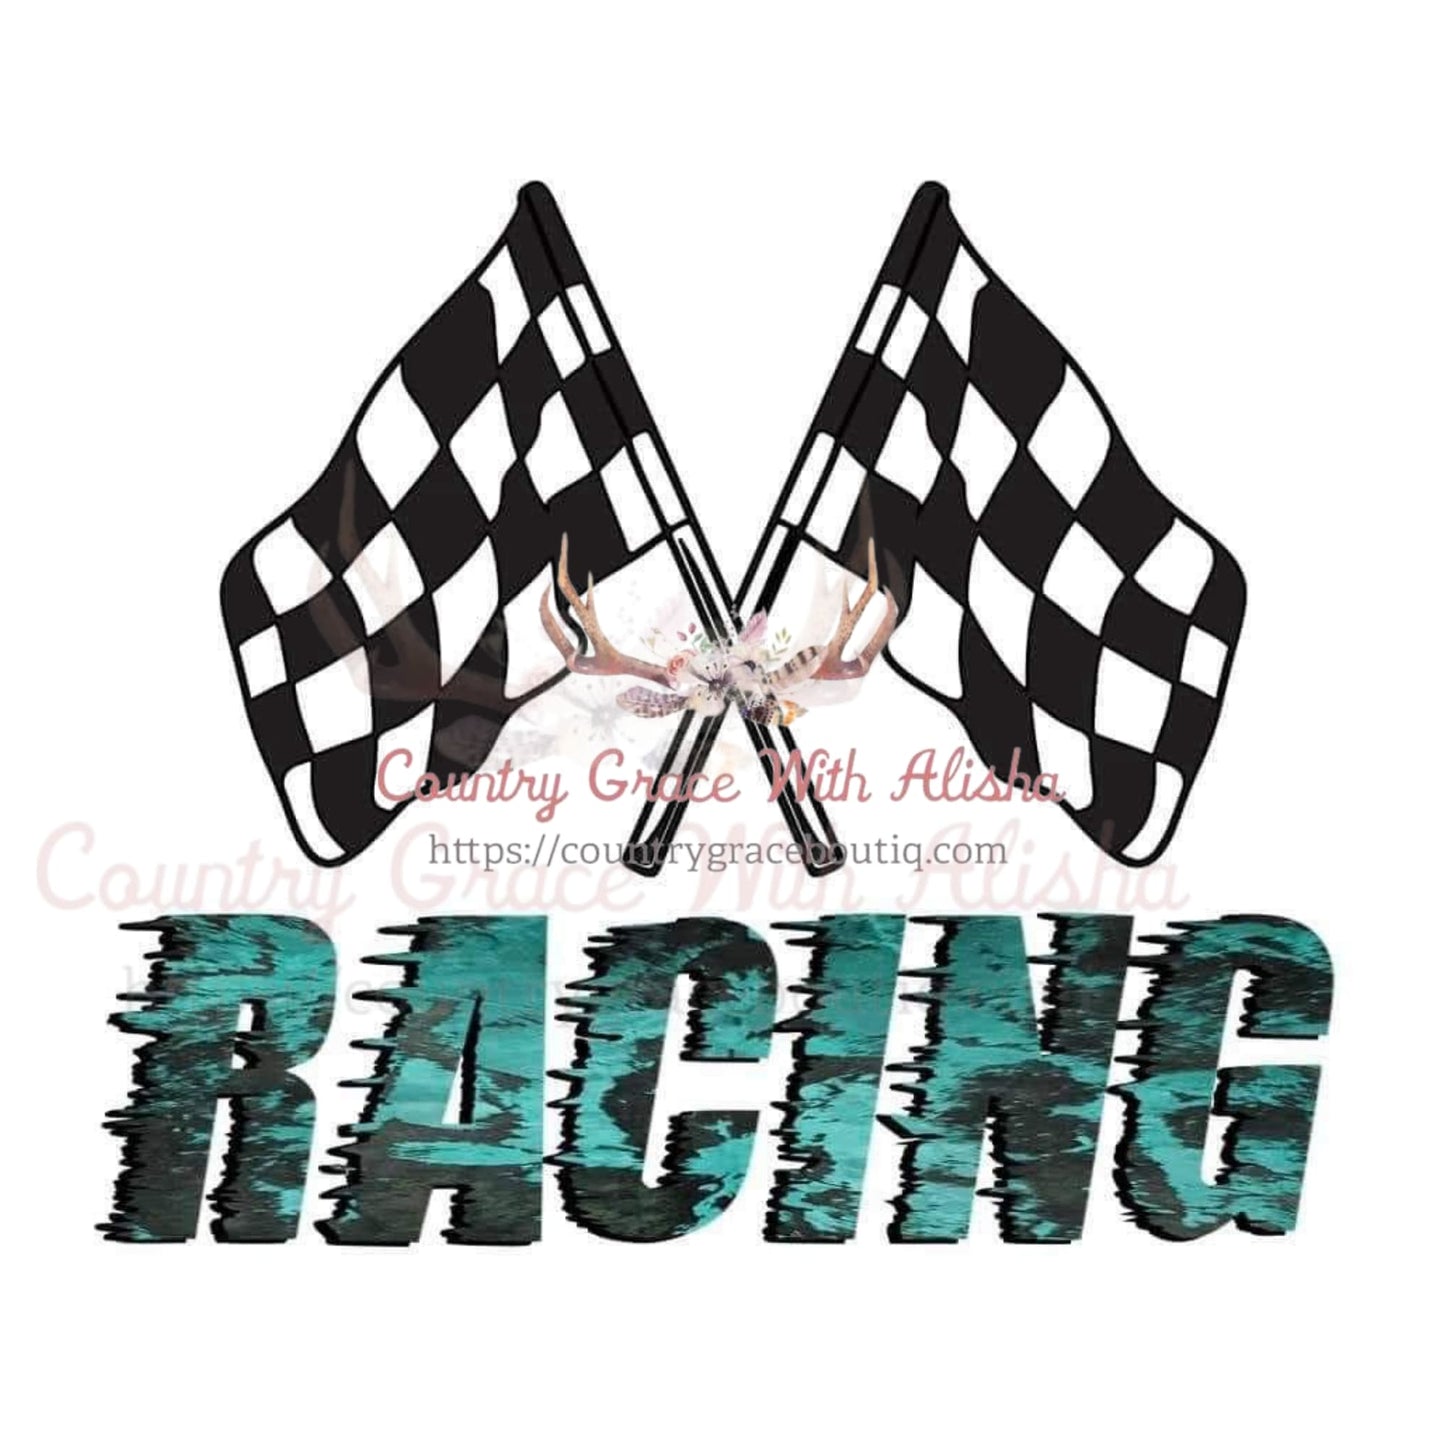 Racing Flag Sublimation Transfer - Sub $1.50 Country Grace 